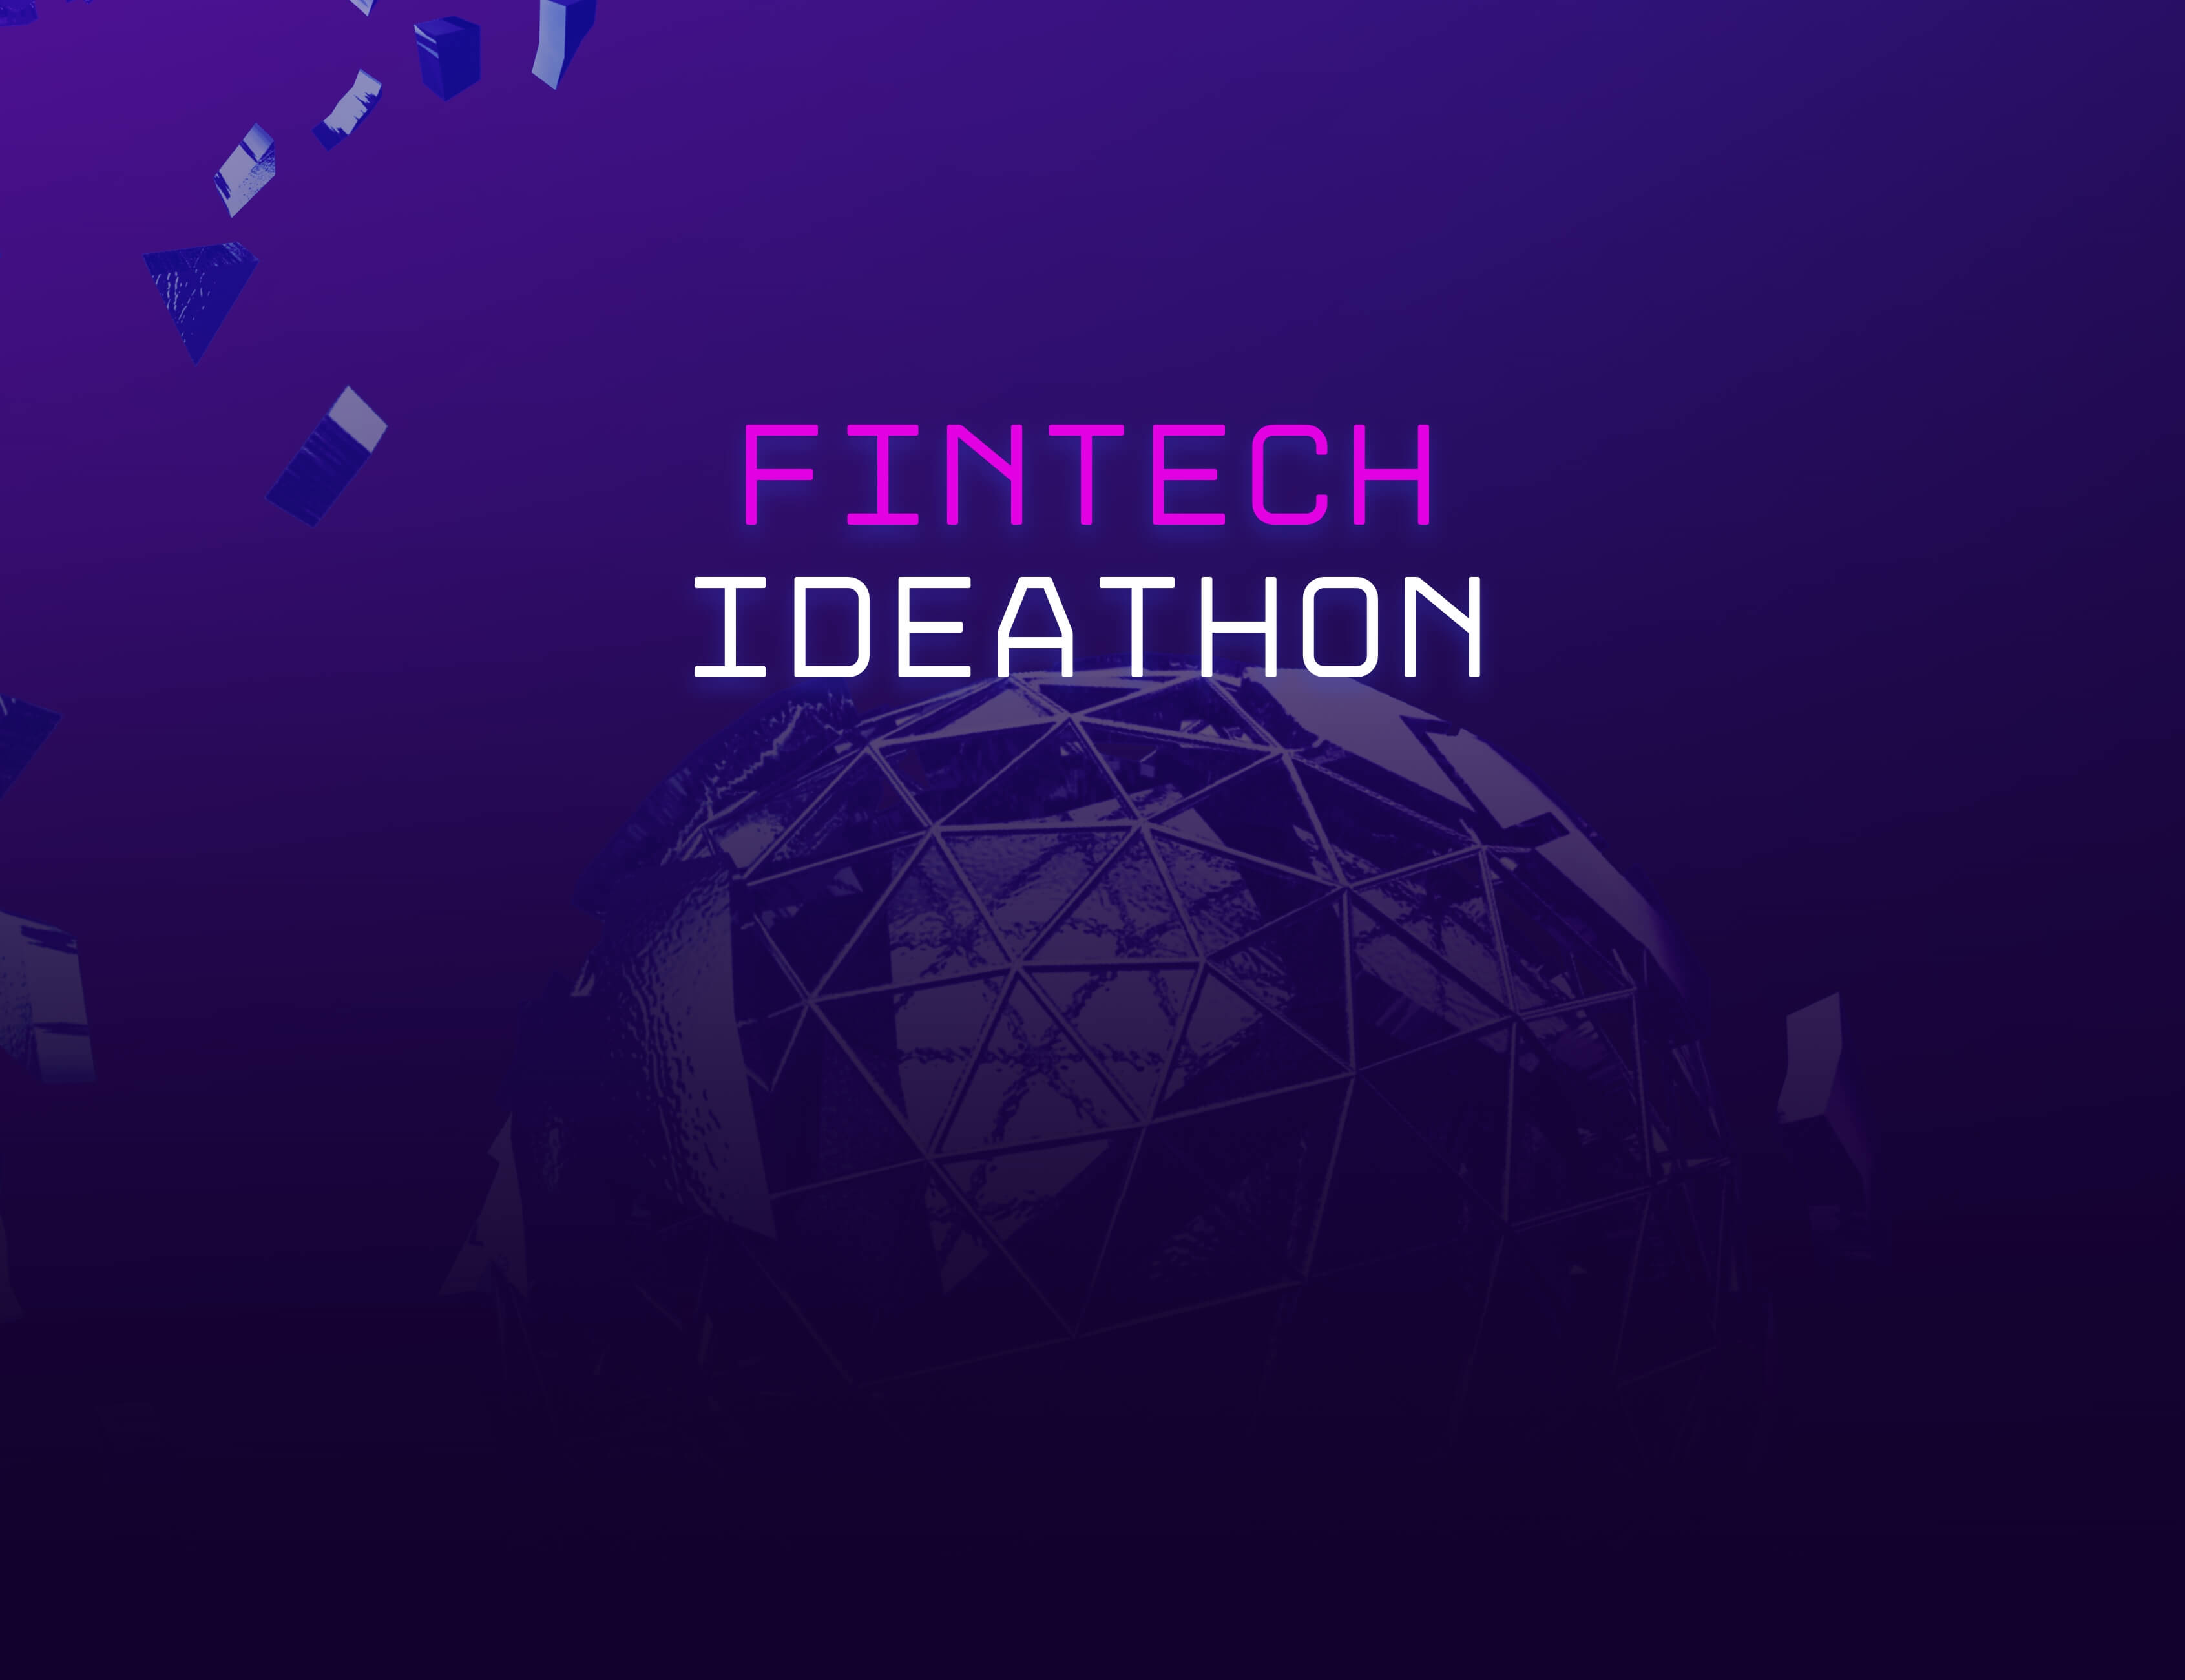 Turkish Technology Fintech Ideathon Applications Have Been Completed!